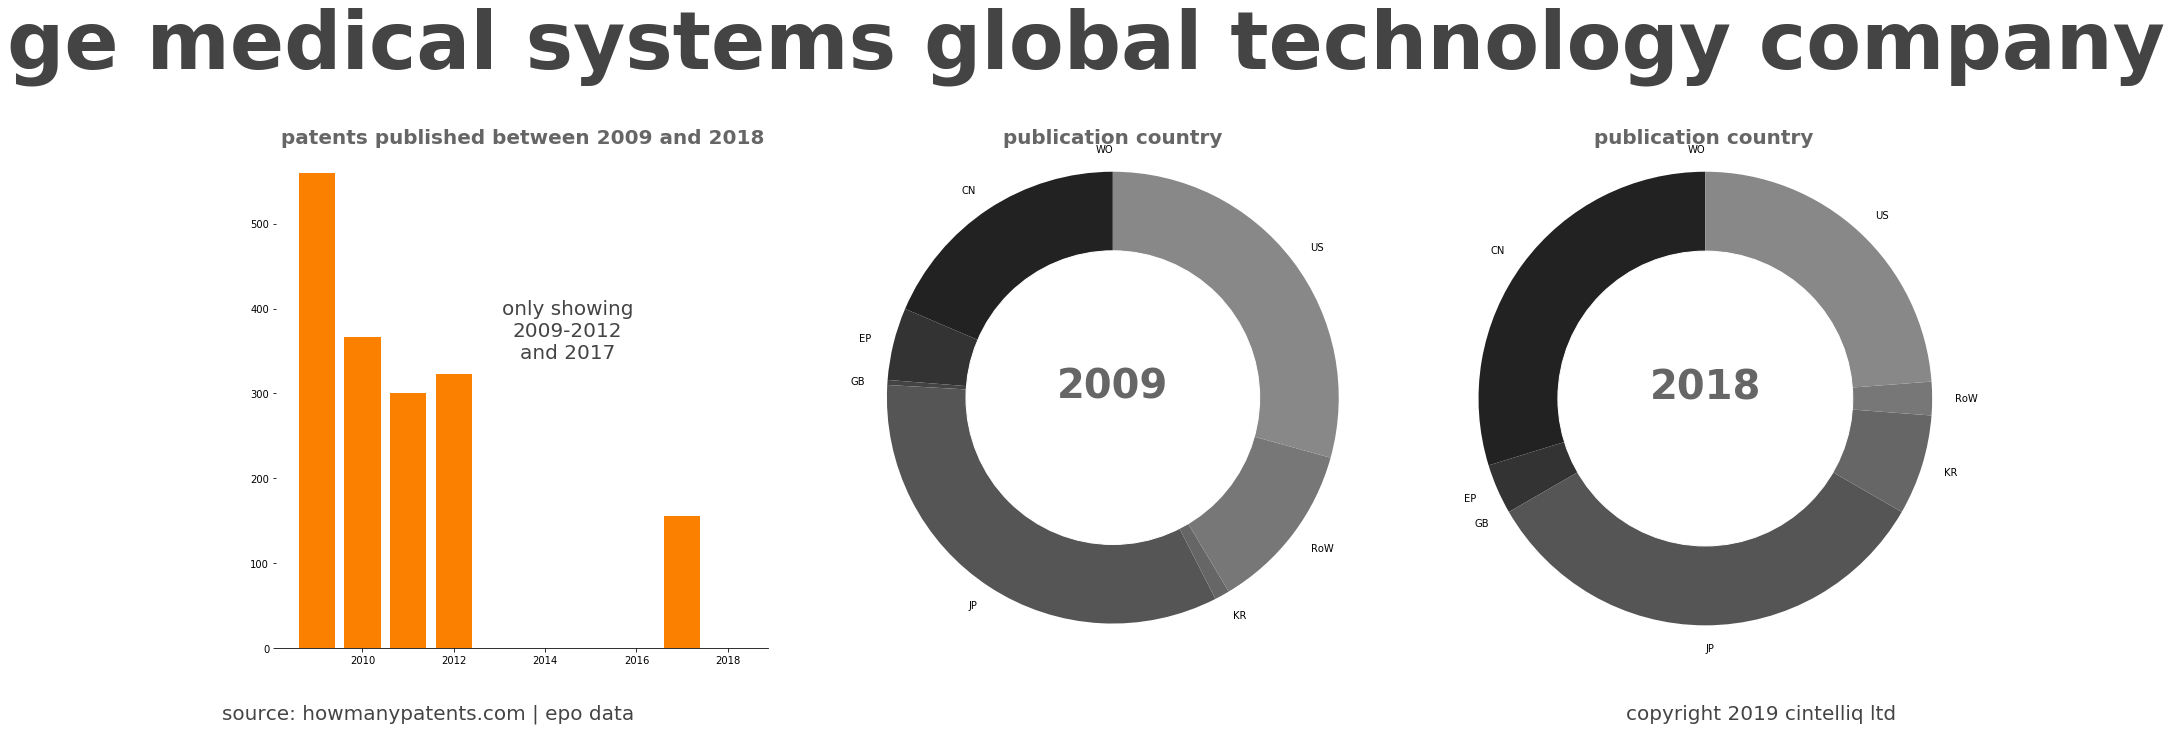 summary of patents for Ge Medical Systems Global Technology Company